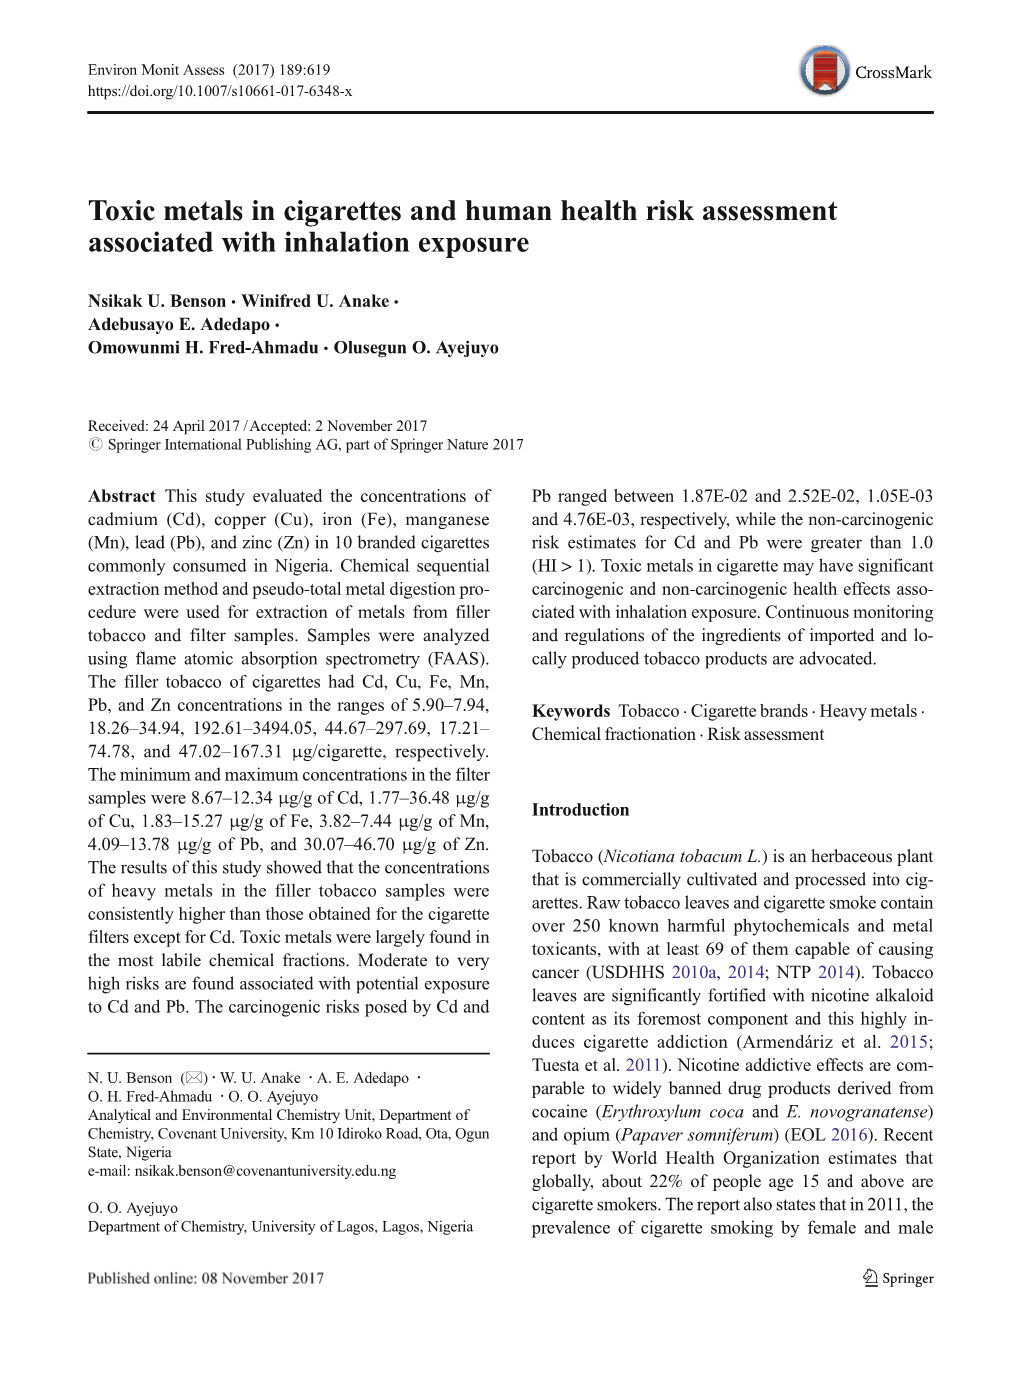 Toxic Metals in Cigarettes and Human Health Risk Assessment Associated with Inhalation Exposure